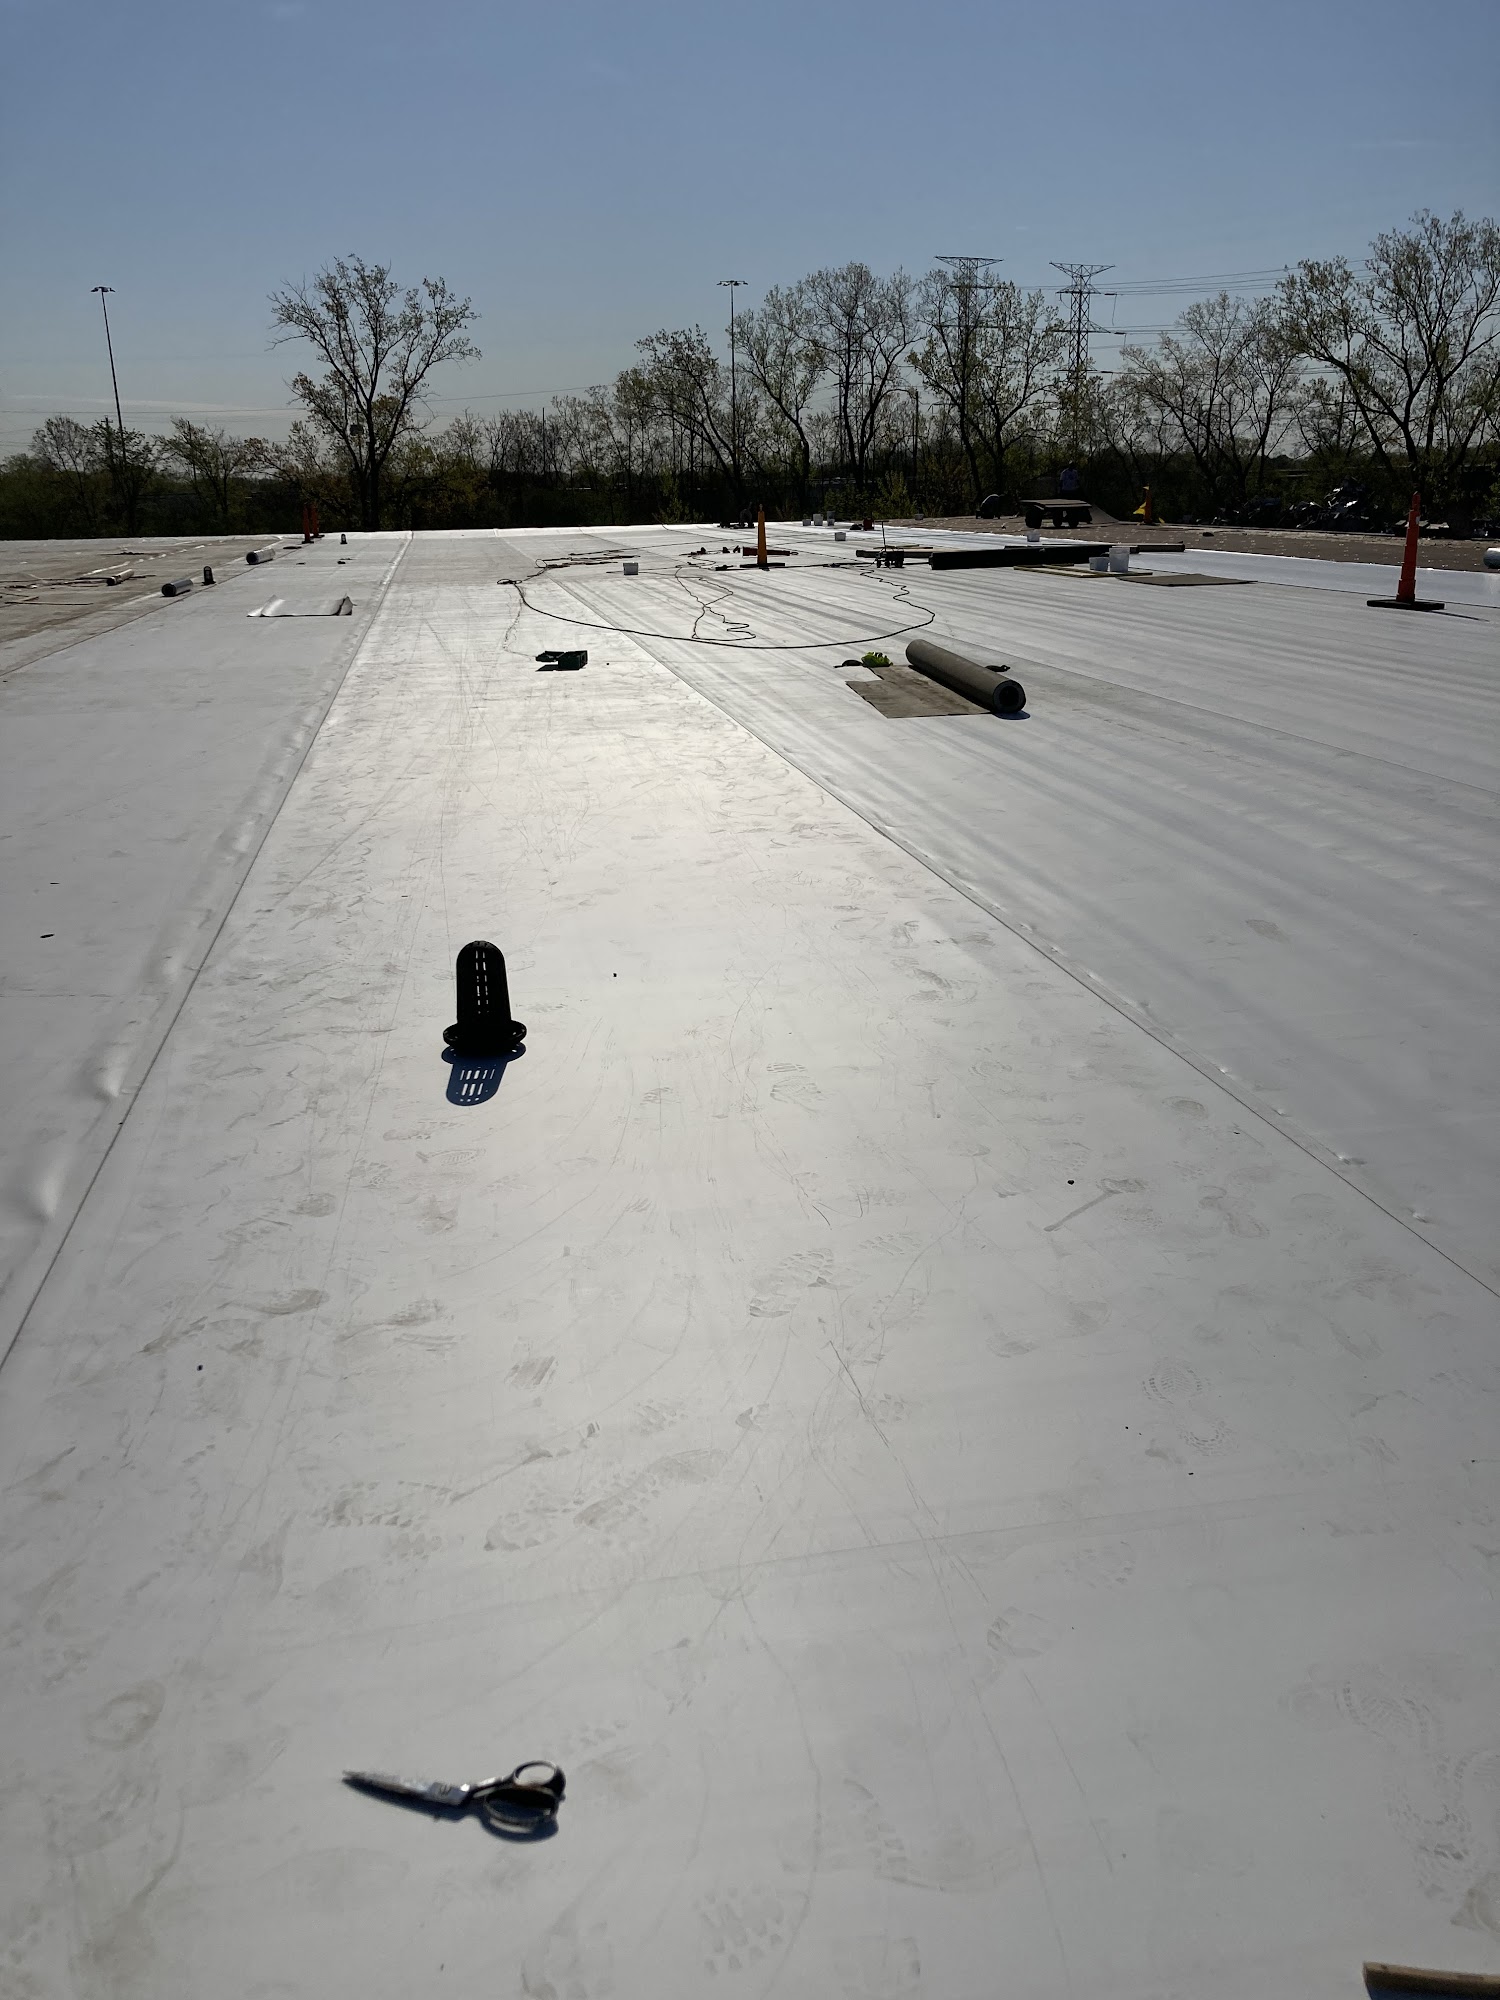 TnZ Roofing Company & Roofing Contractor 24 US-12, Fox Lake Illinois 60020